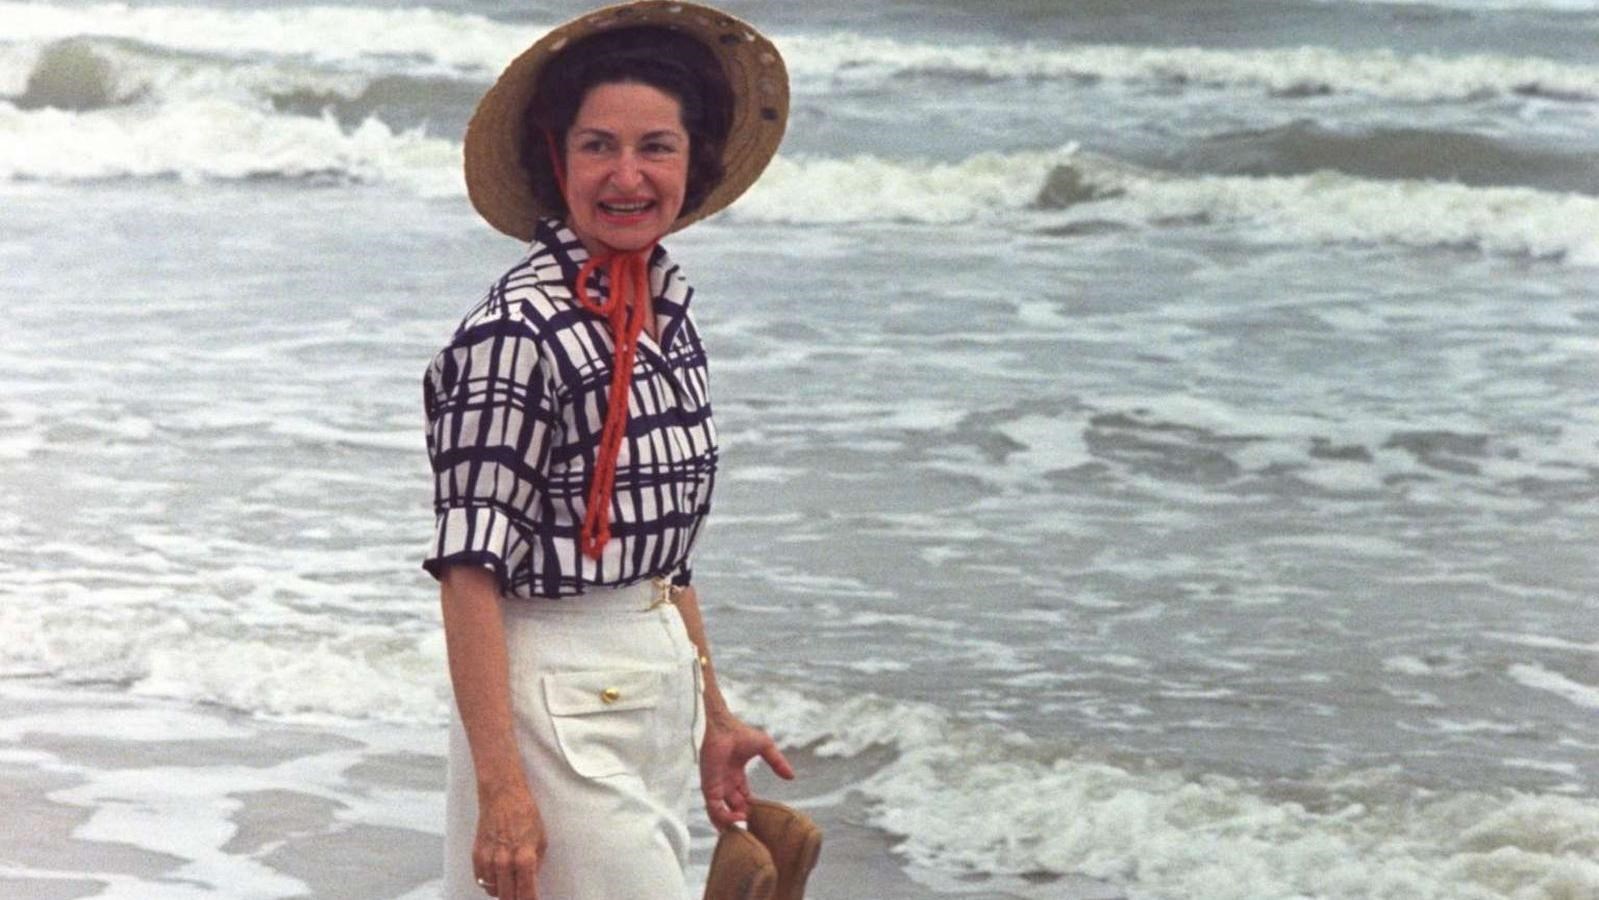 Holding her shoes, Lady Bird Johnson smiles as she walks along the beach in the surf. 